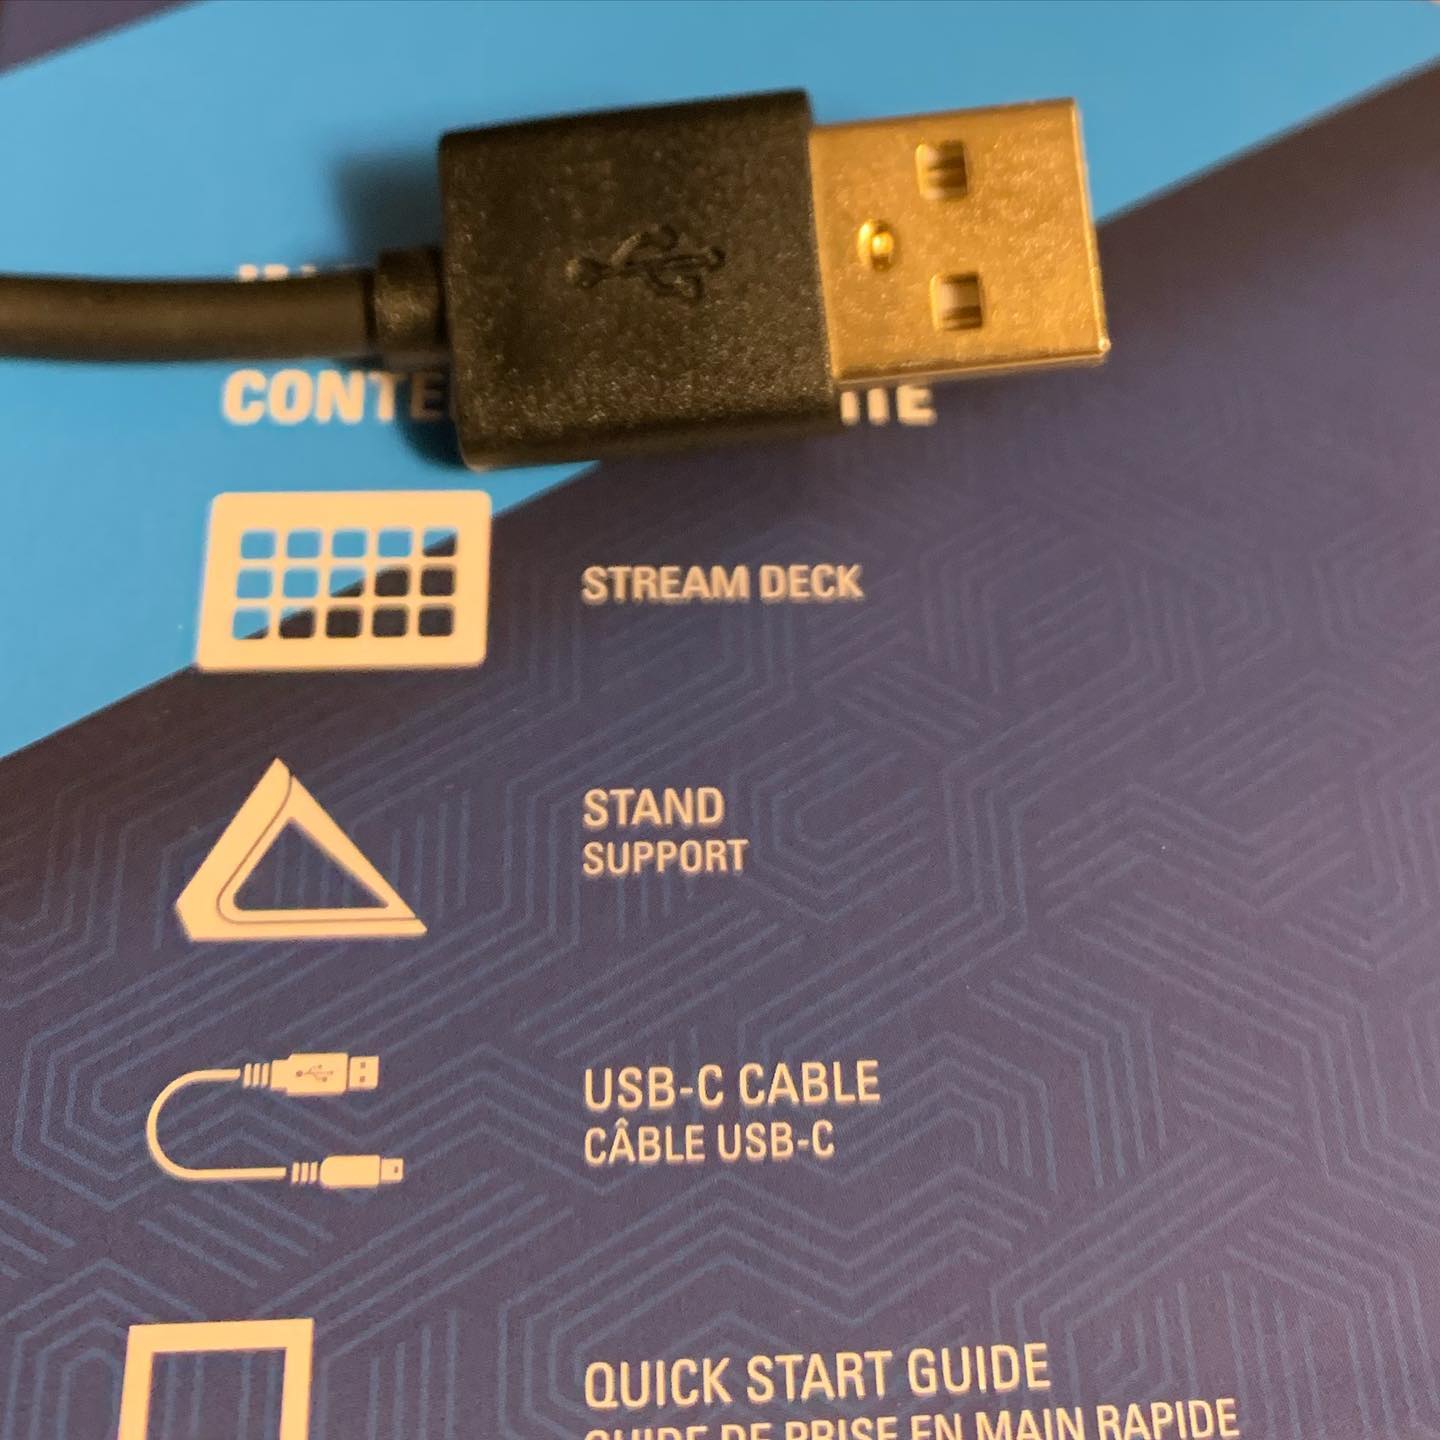 Hey @elgato , when the box says USB-C, I expect to be able to connect to my USB-C port on my MacBook Pro . I bought a StreamDeck today but didn’t buy a cable since the box indicates I should be able to plug it in. Now I have to make another trip to the store. #firstworldproblem #brokenlabel